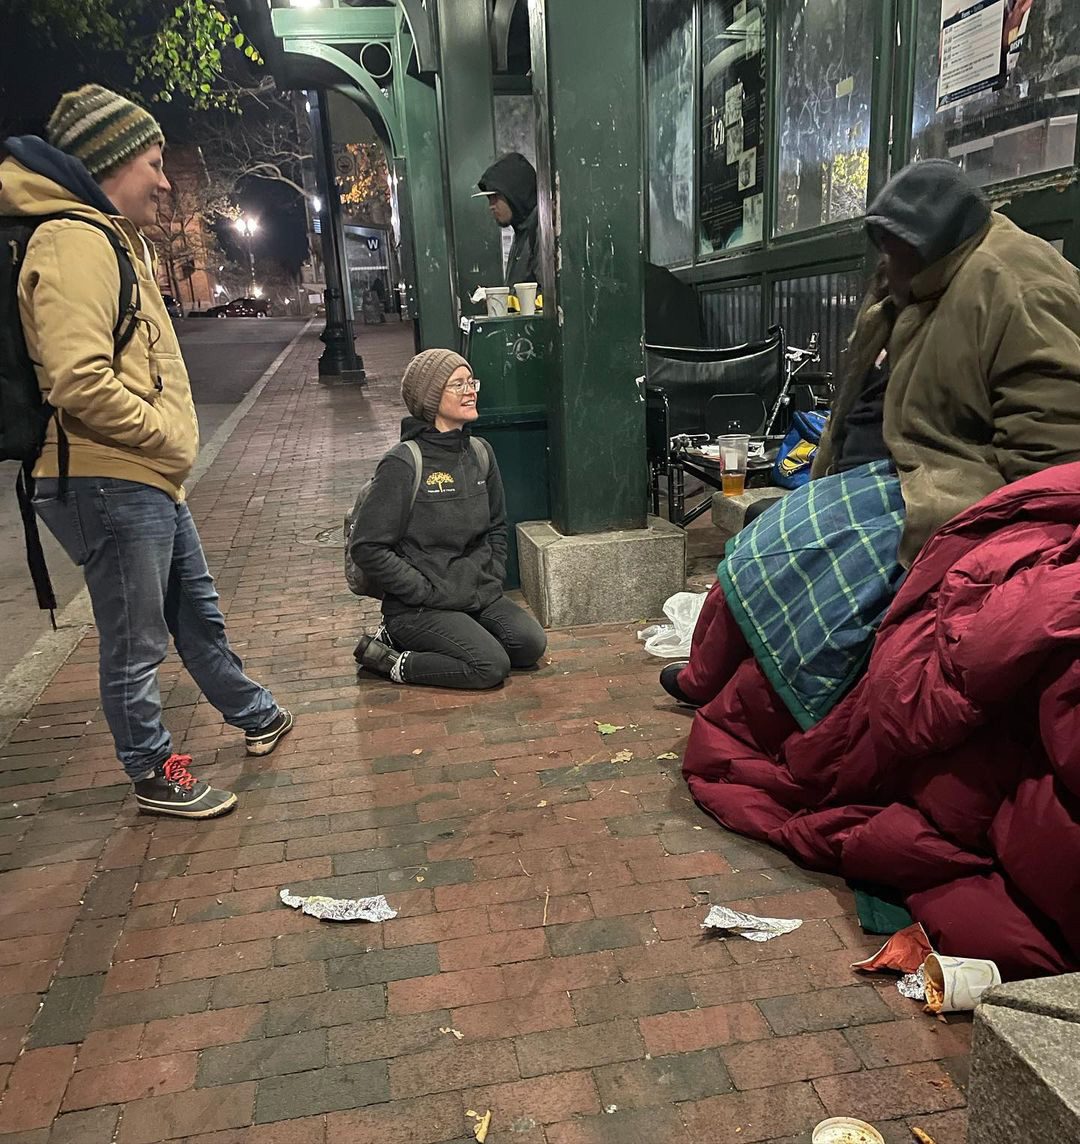 Group of people sitting outside on the street wearing warm clothing